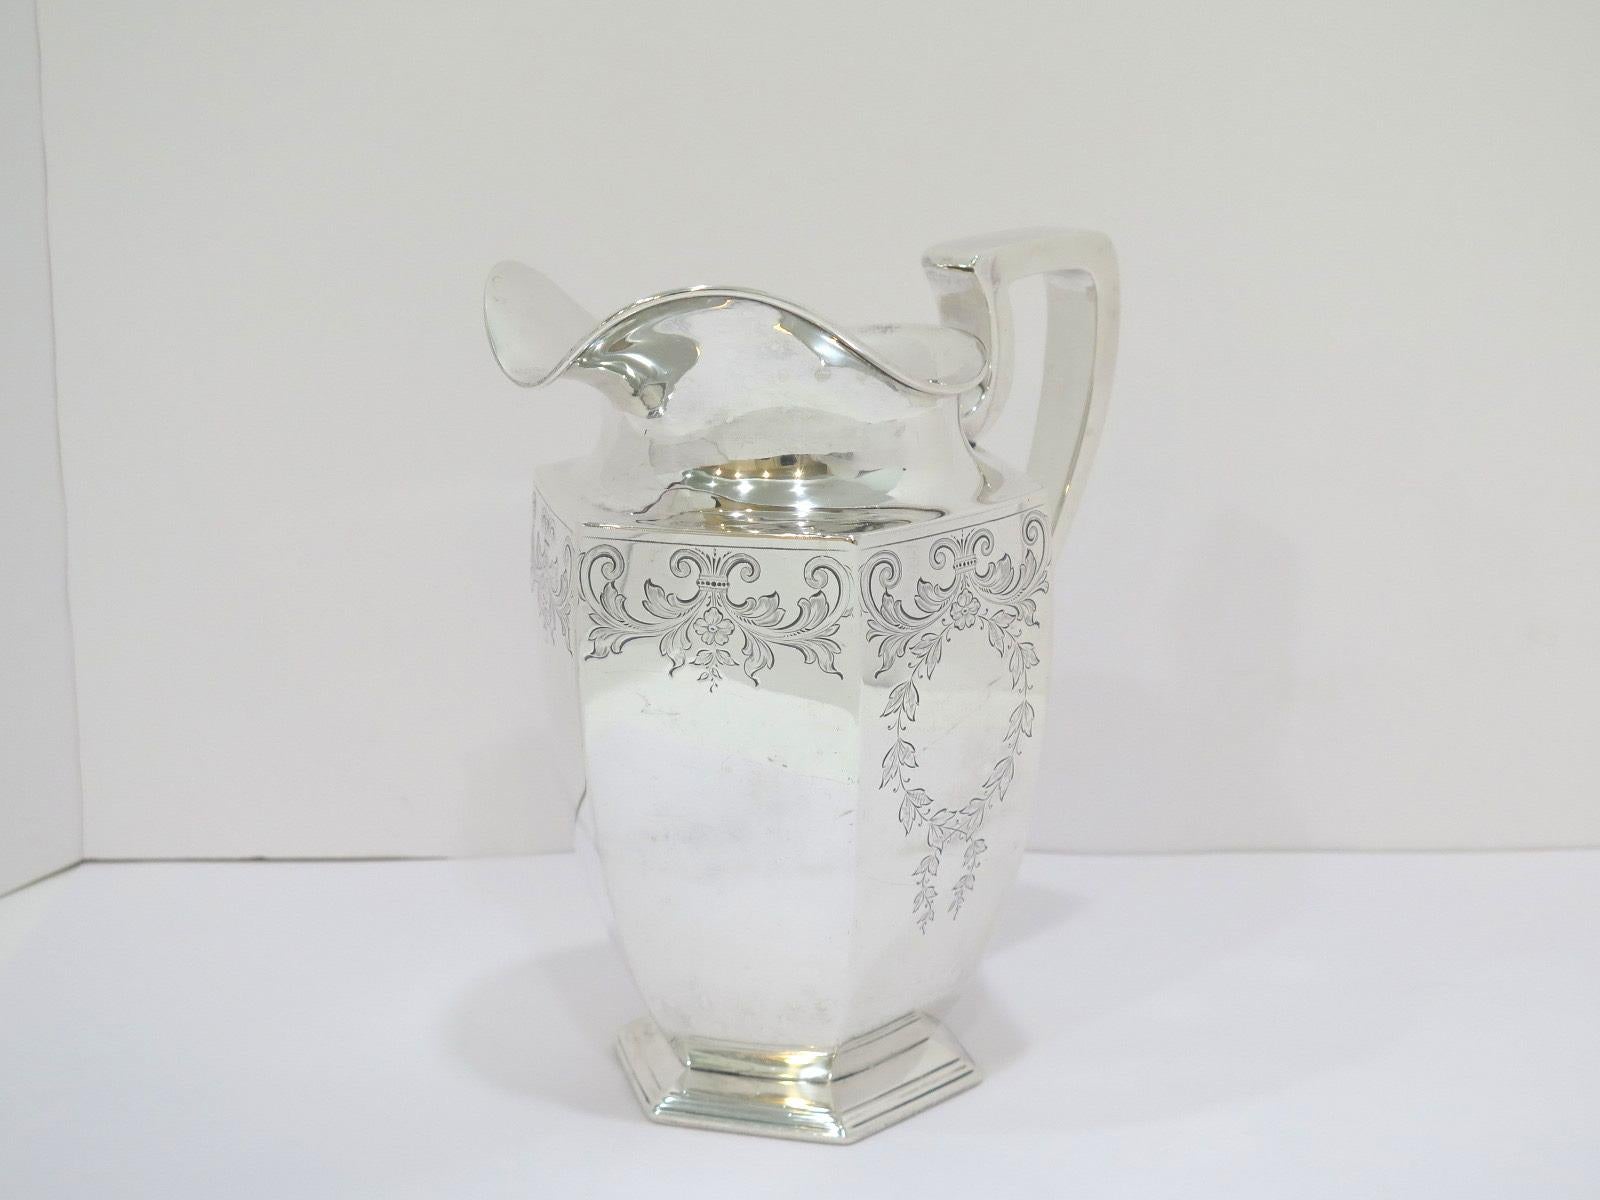 American 9.25 in Sterling Silver Dominick & Haff Antique Floral Scroll Hexagonal Pitcher